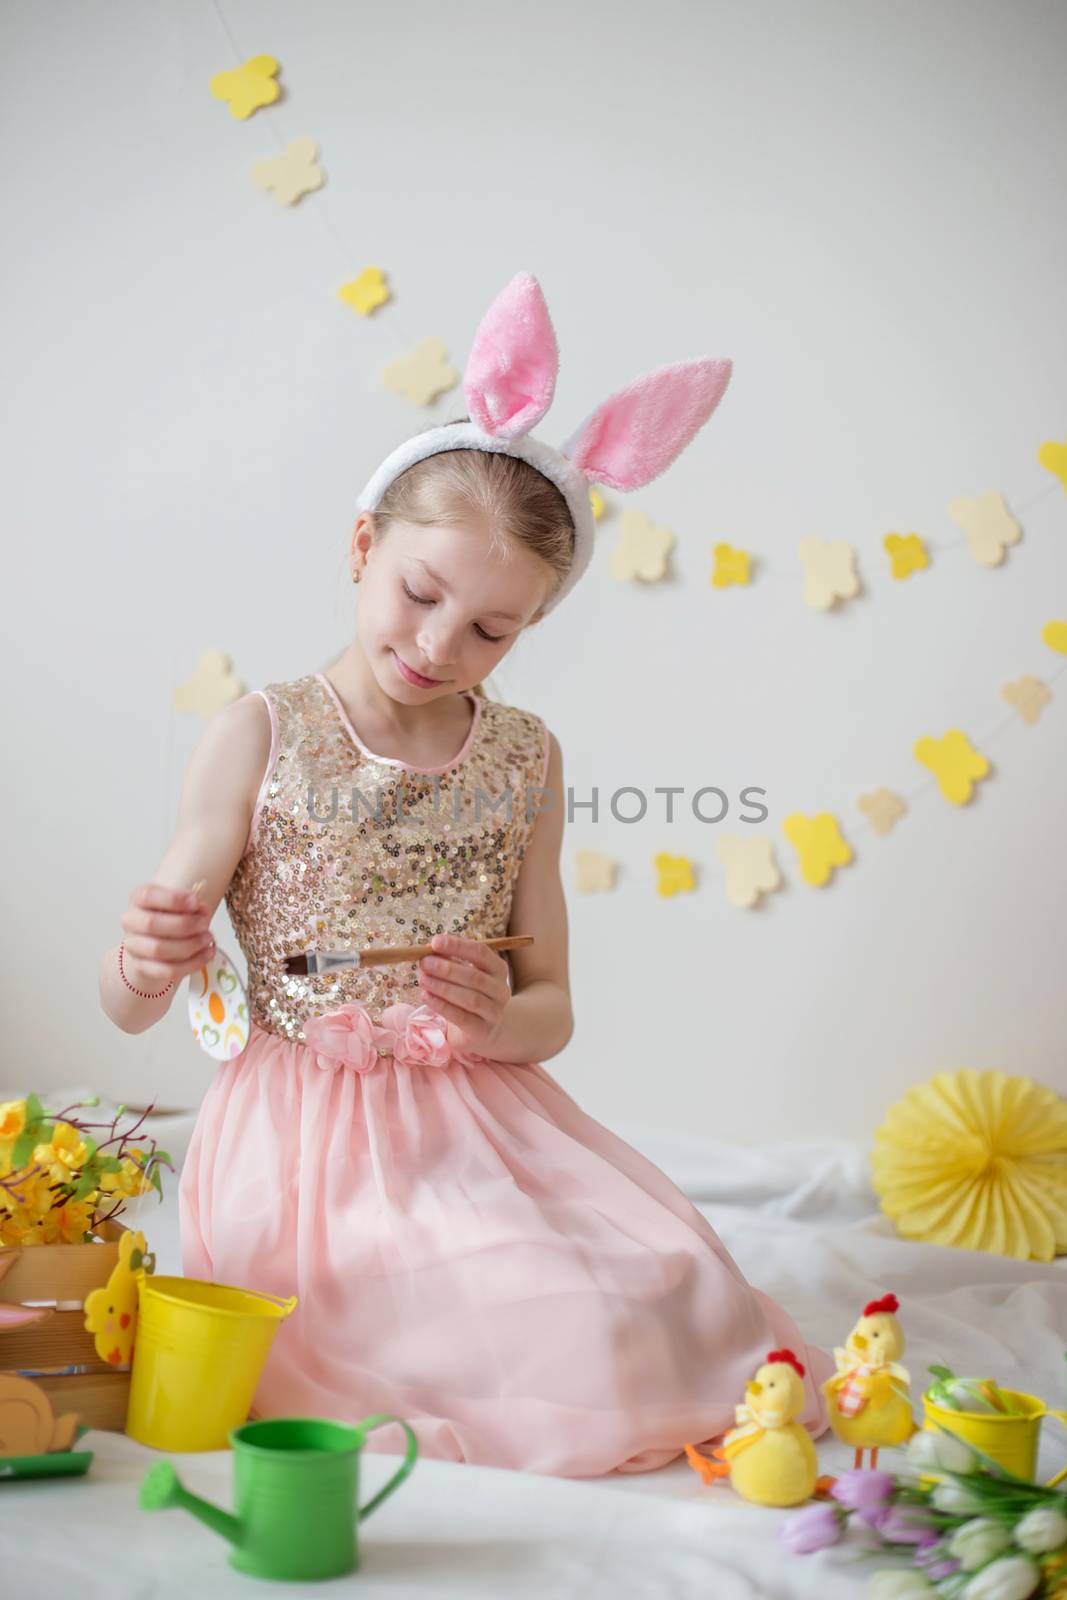 Cute little girl with bunny ears painting eggs, Easter decoratio by Angel_a